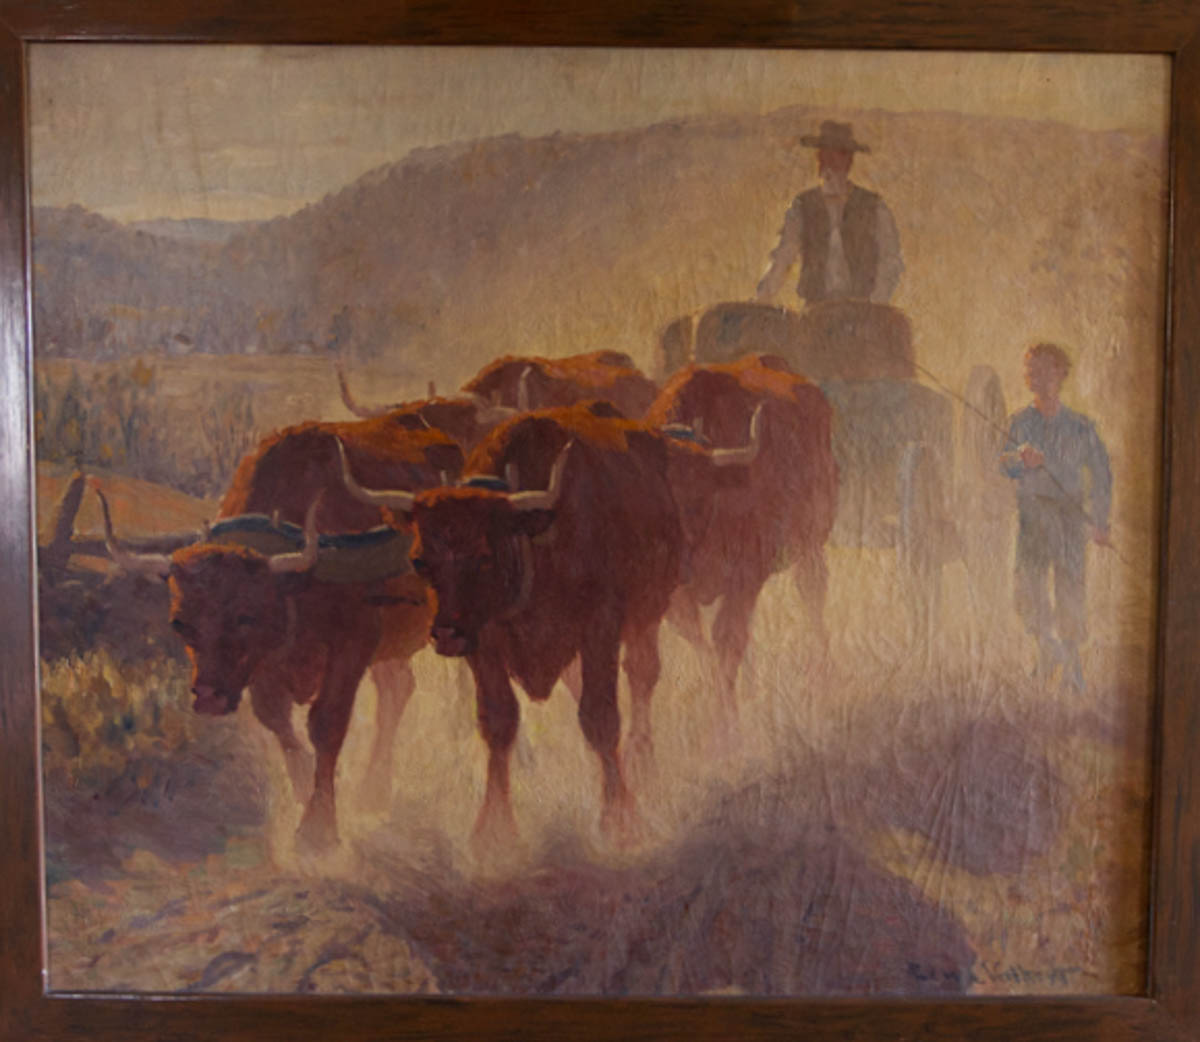 Untitled [Oxen and two drivers on a dusty road]